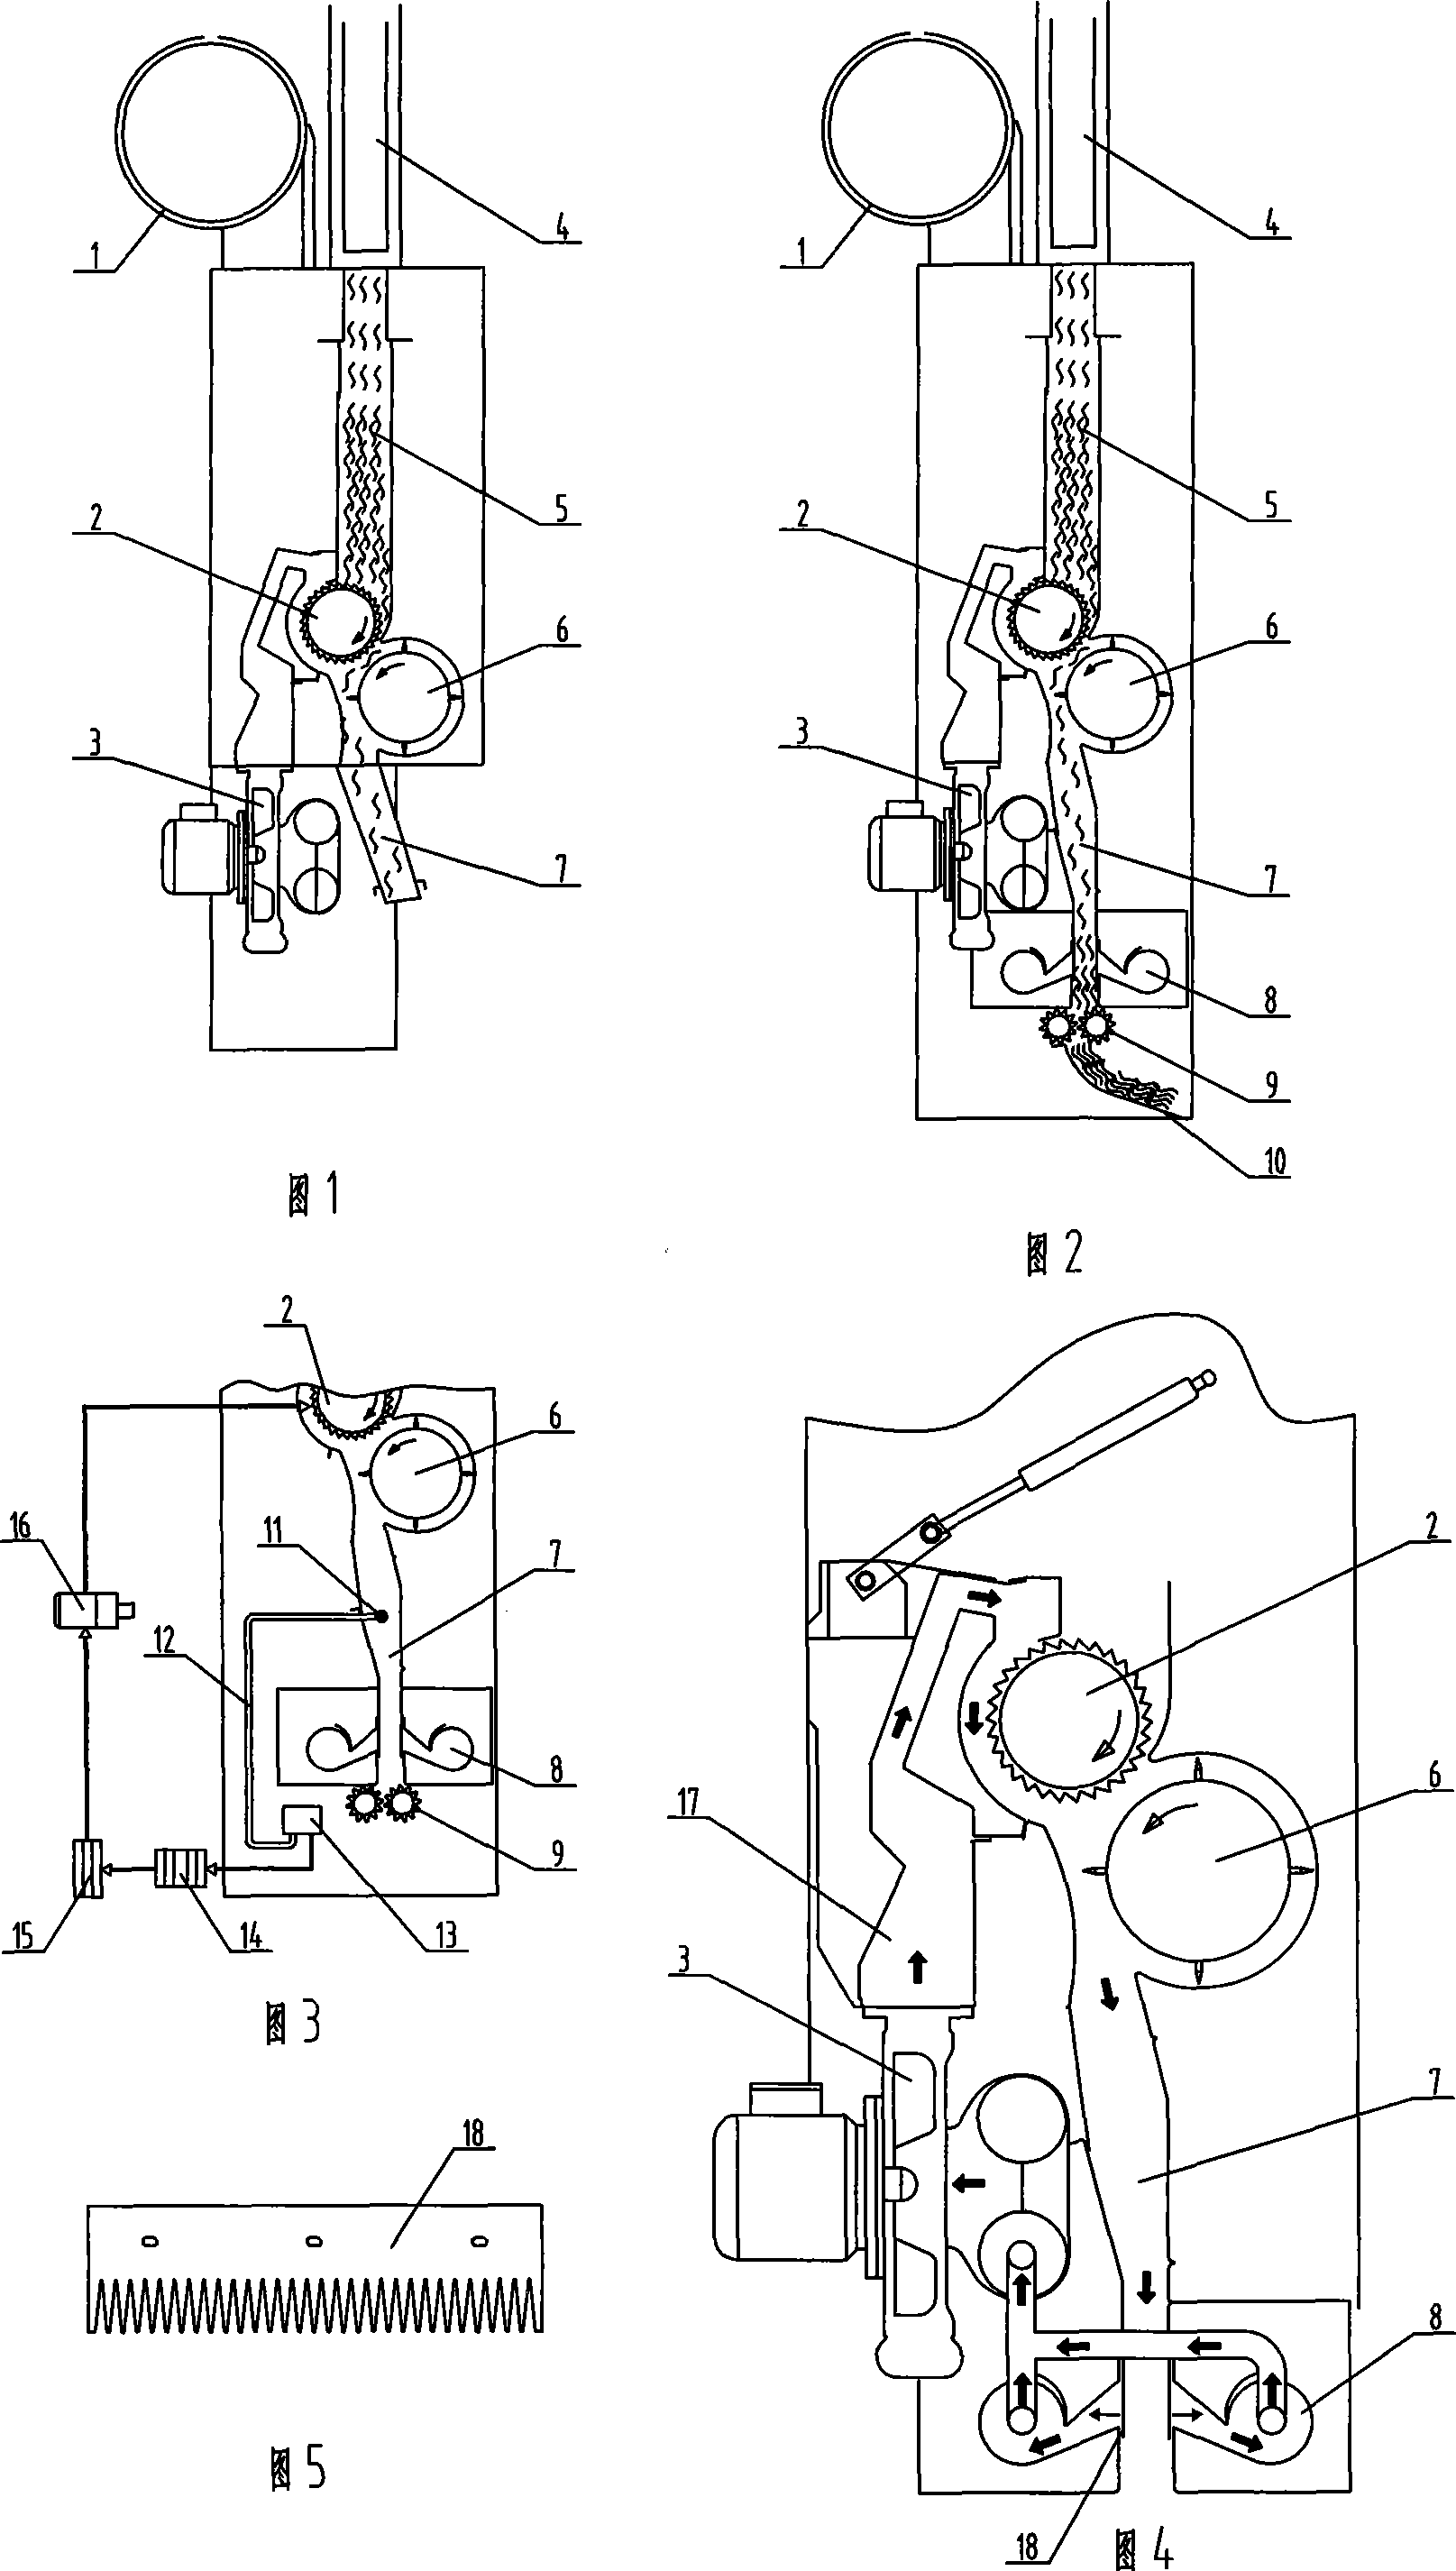 Cotton feed box adapted for blowing-carding process